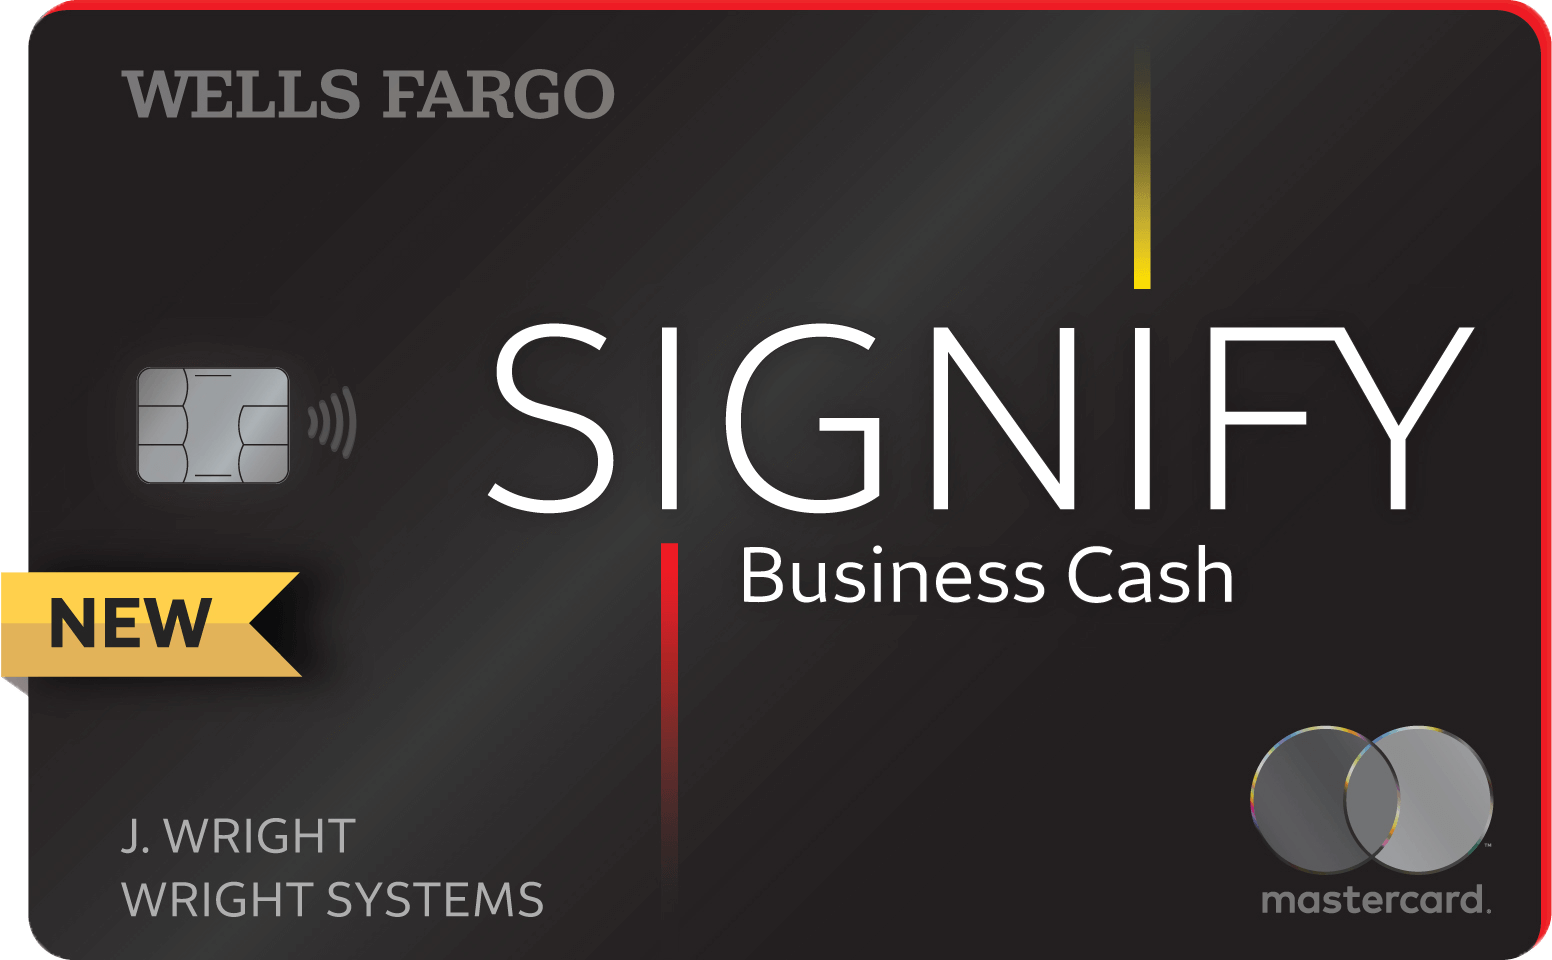 Wells Fargo Signify Business Cash Visa® Card with chip and contactless tap to pay technology.